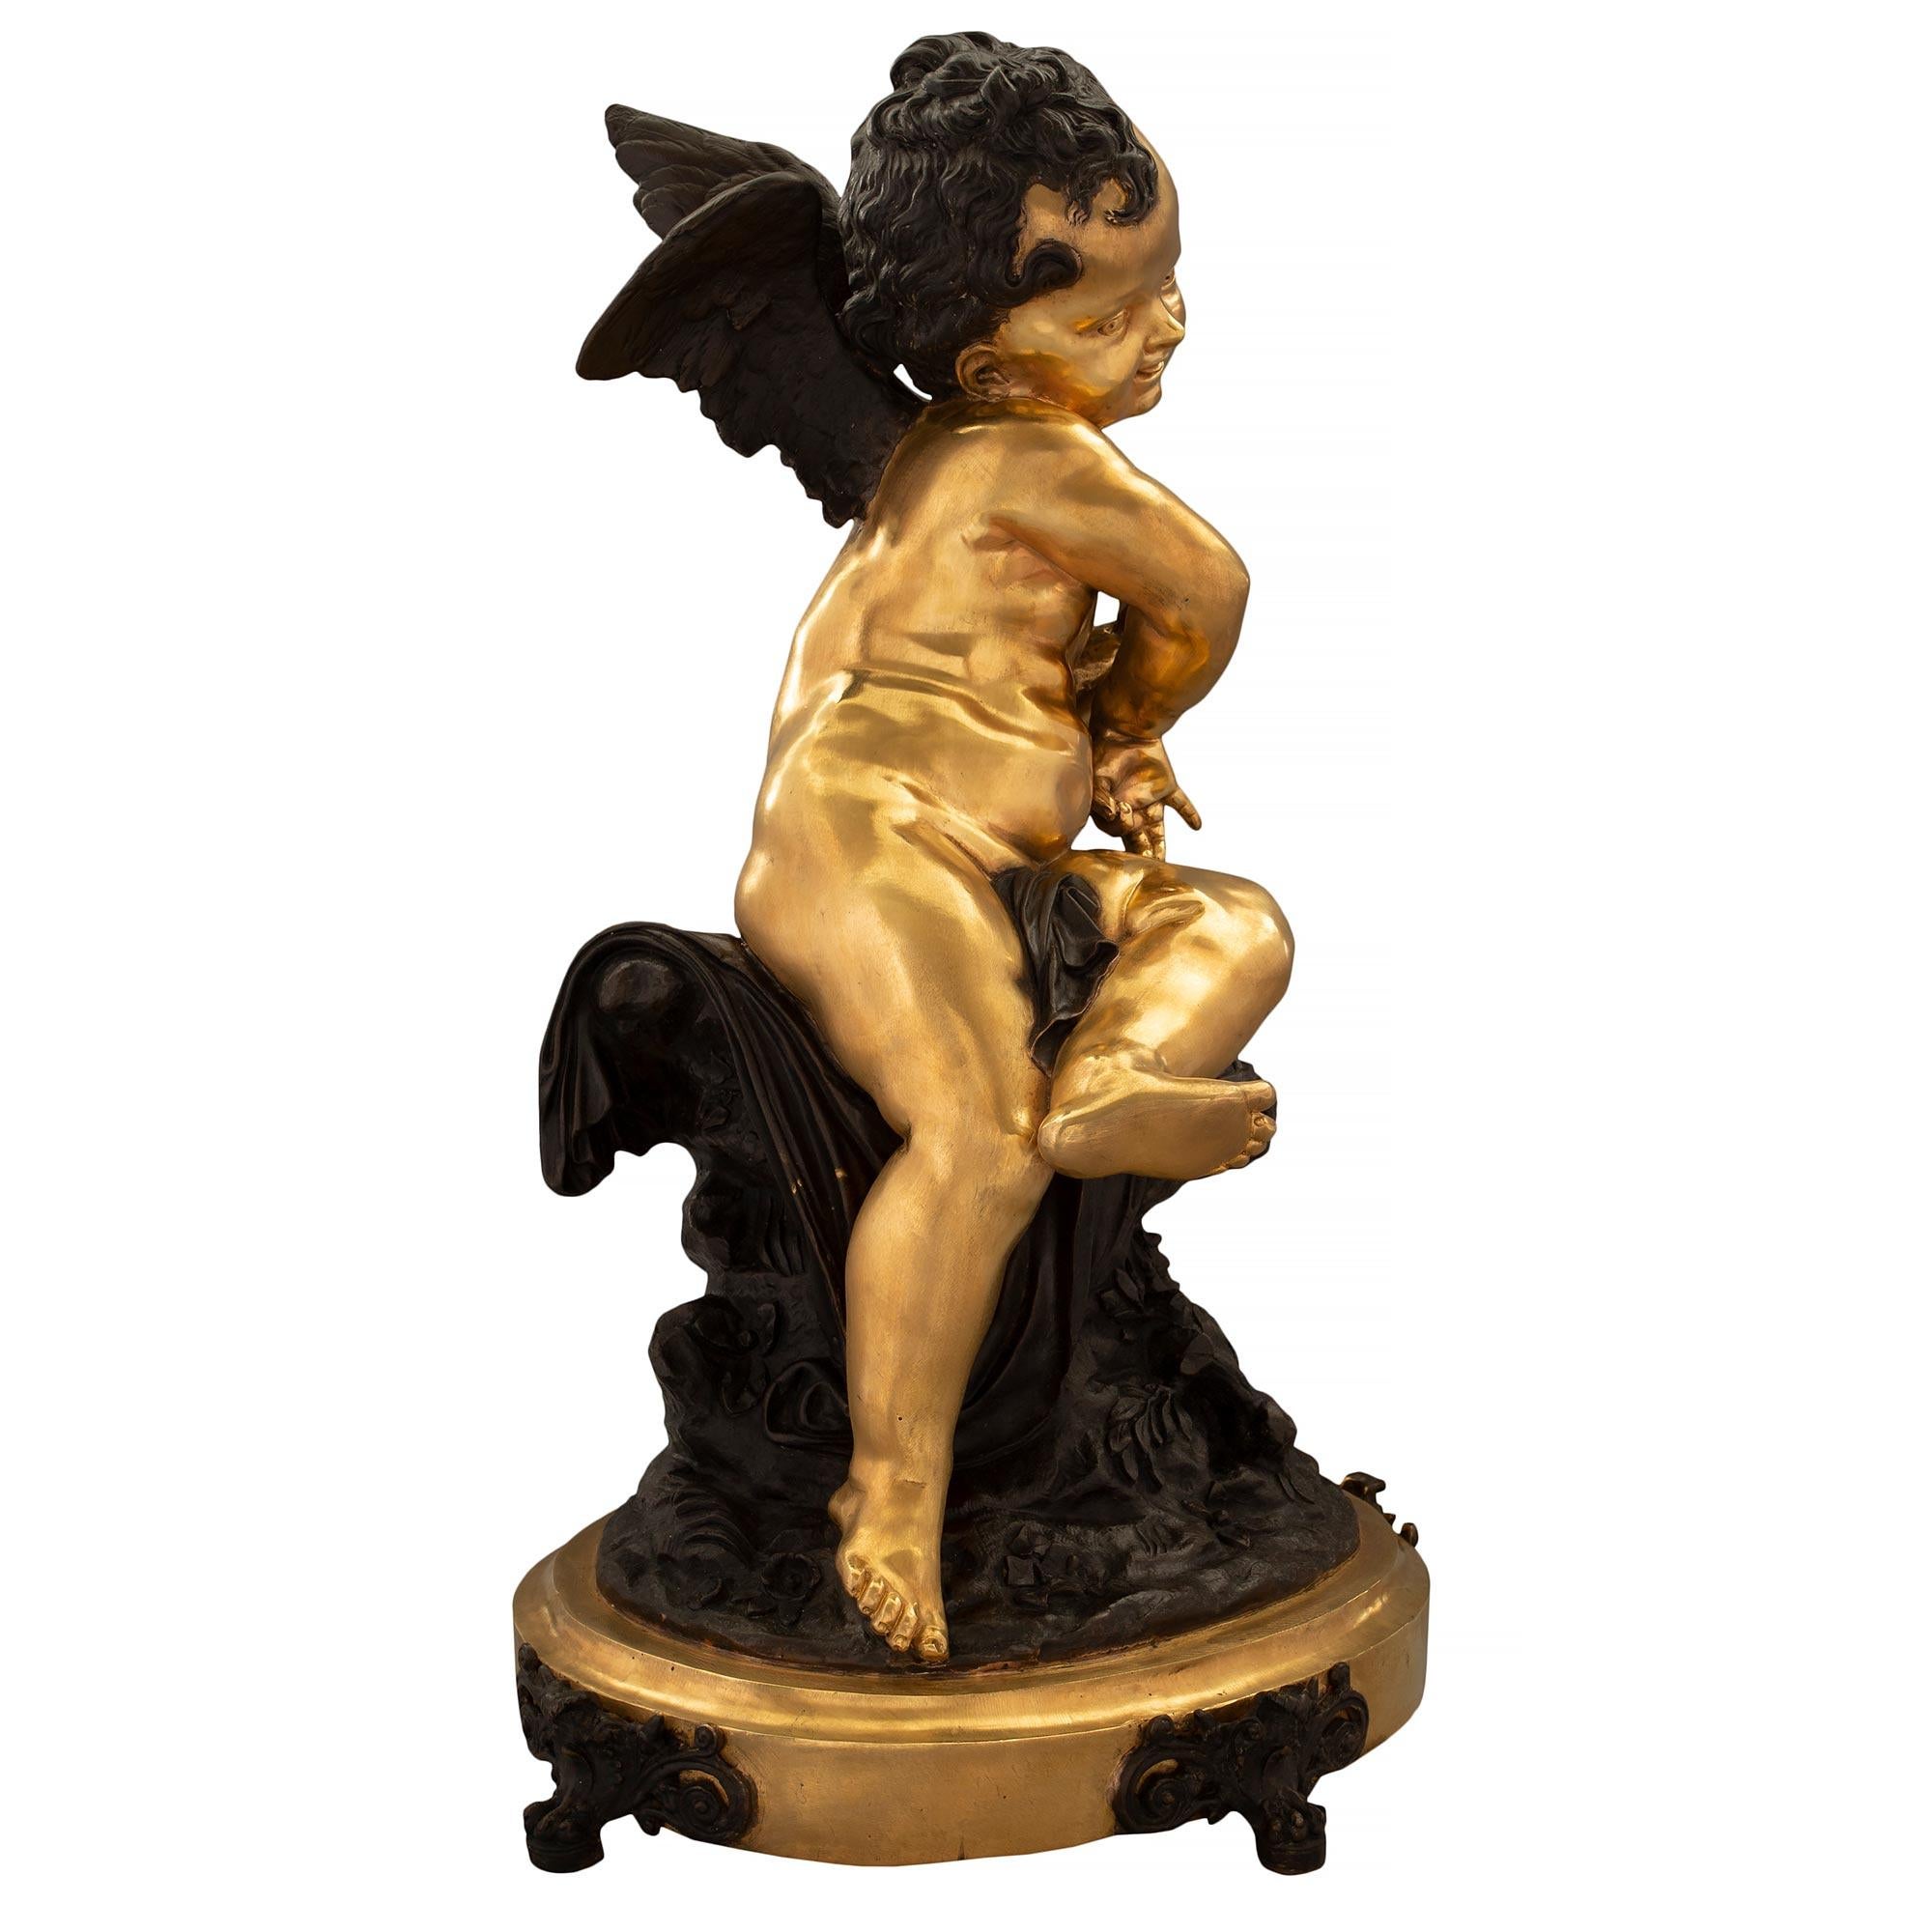 A charming and high quality French 19th century Louis XVI st. ormolu and patinated bronze signed statue. The statue is raised by an oval ormolu base with a mottled border and most decorative scrolled pierced patinated bronze feet. Above the richly